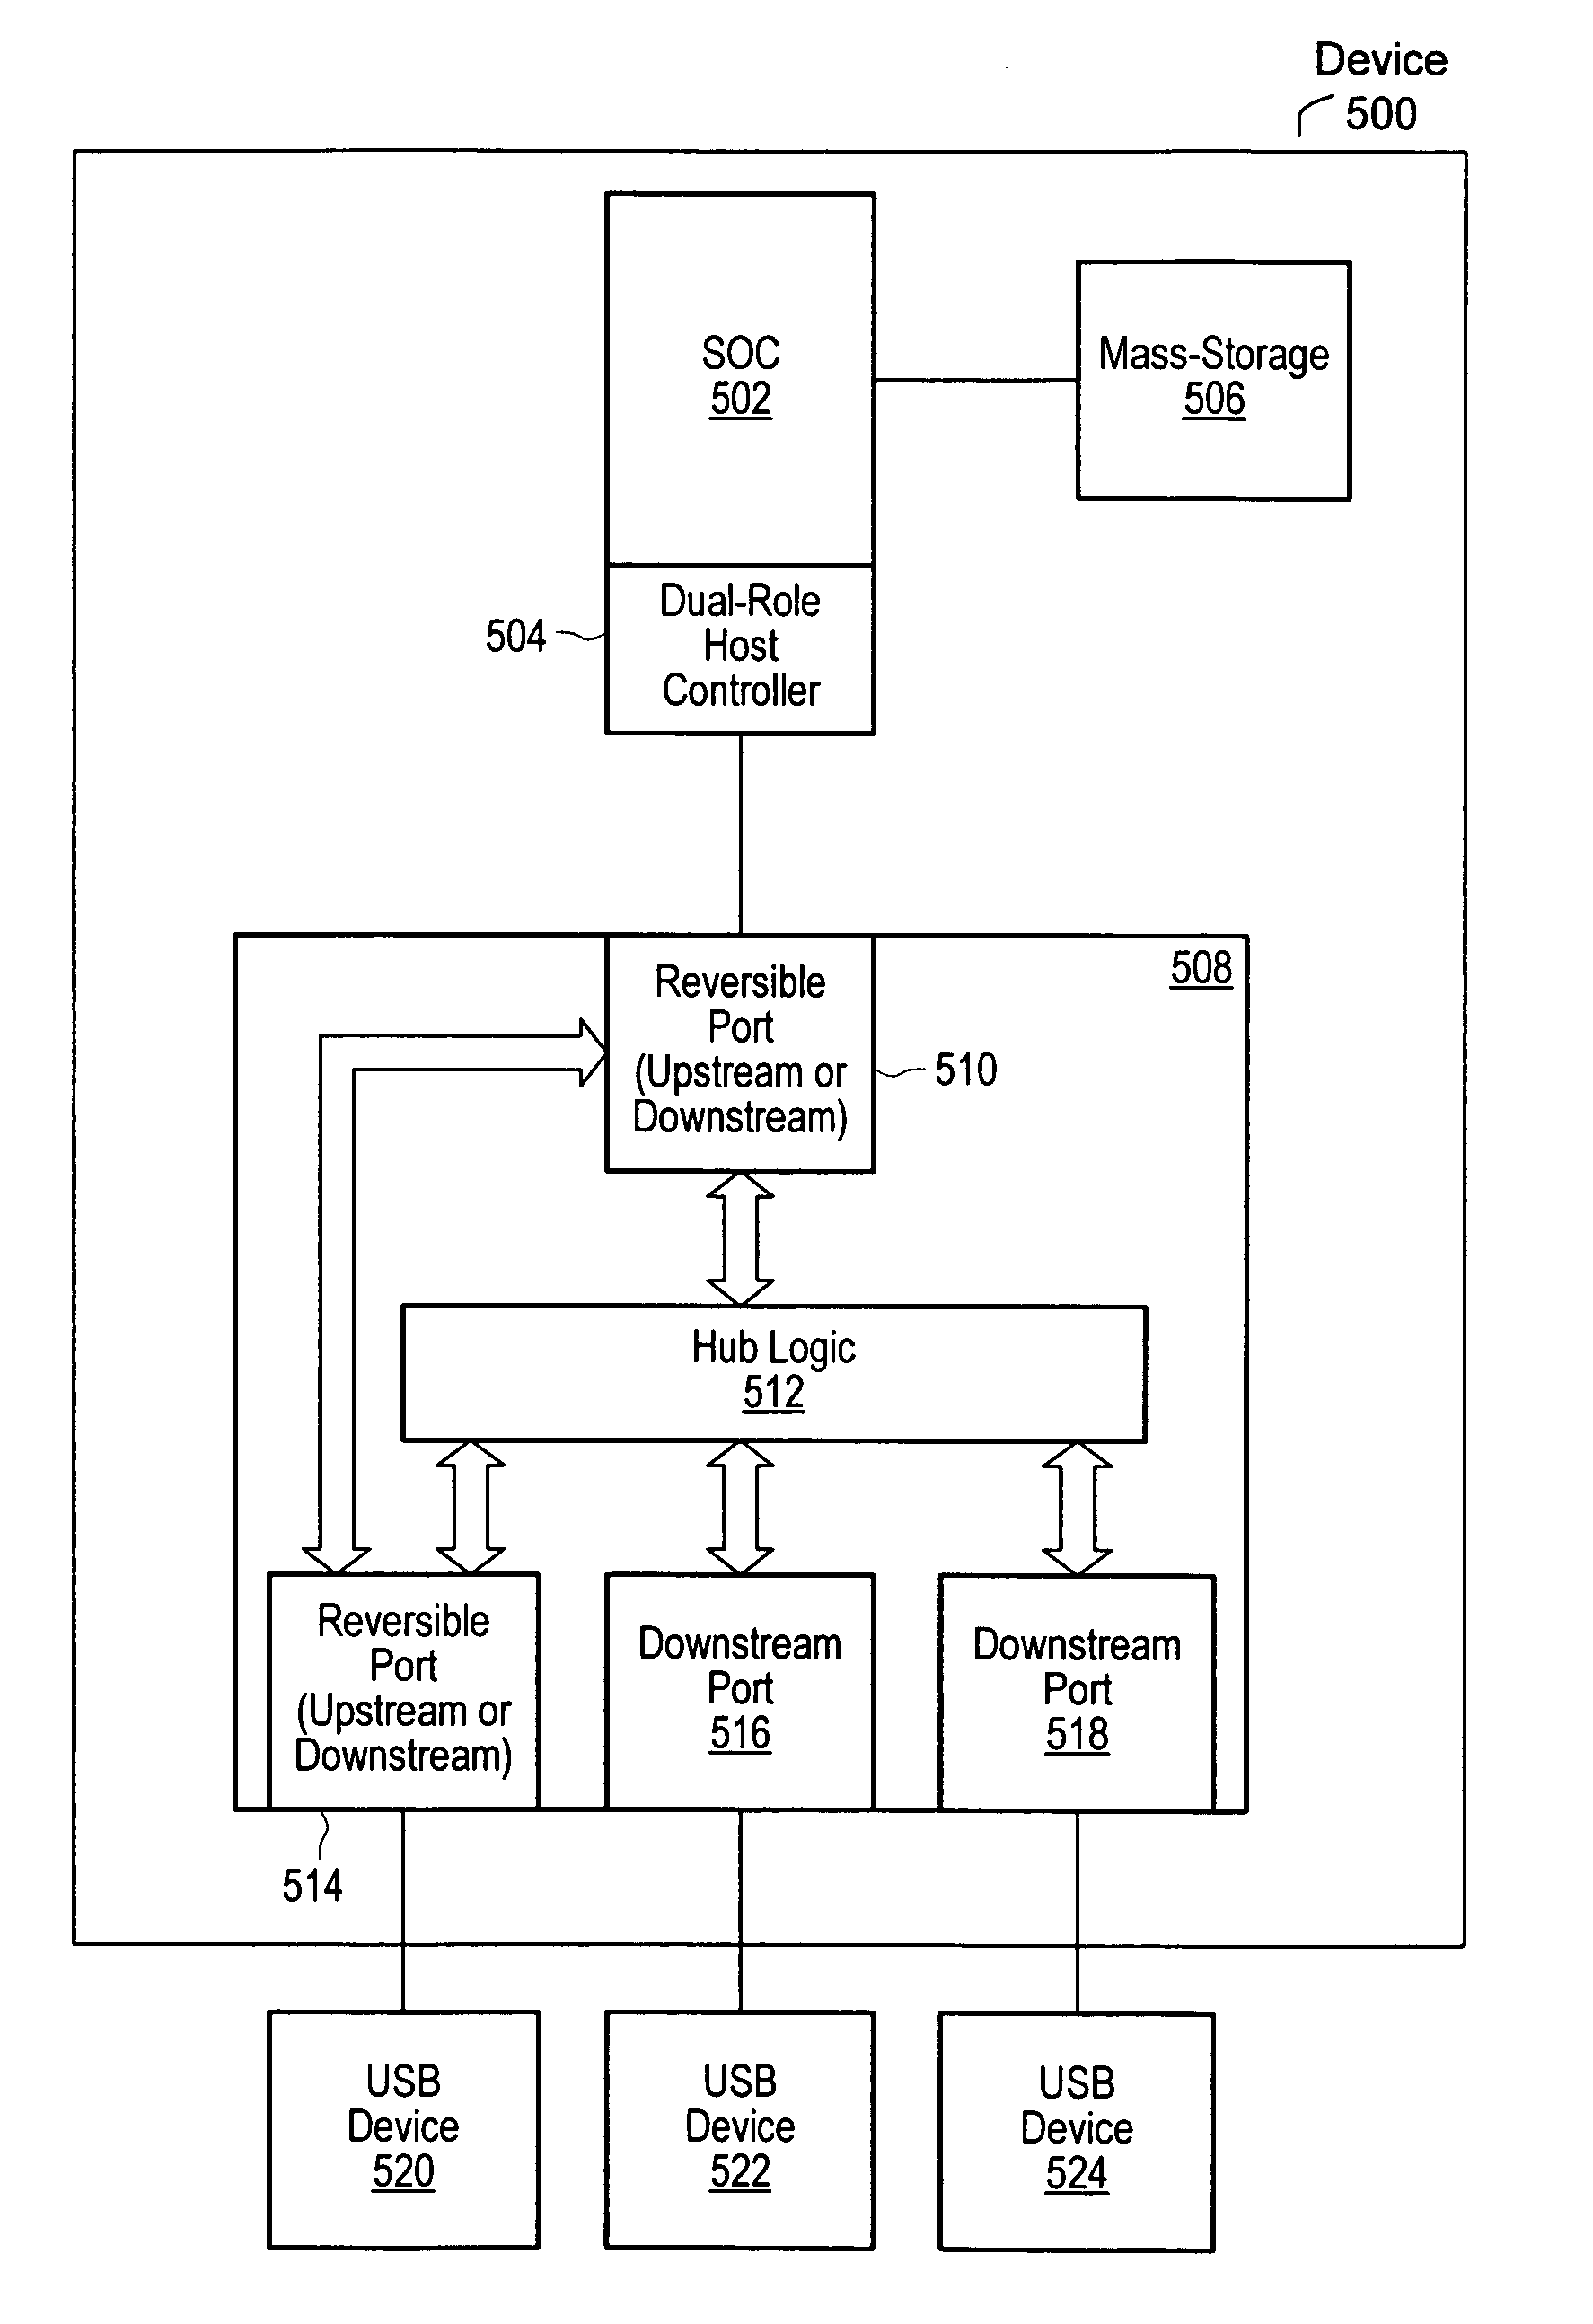 Switching upstream and downstream logic between ports in a universal serial bus hub